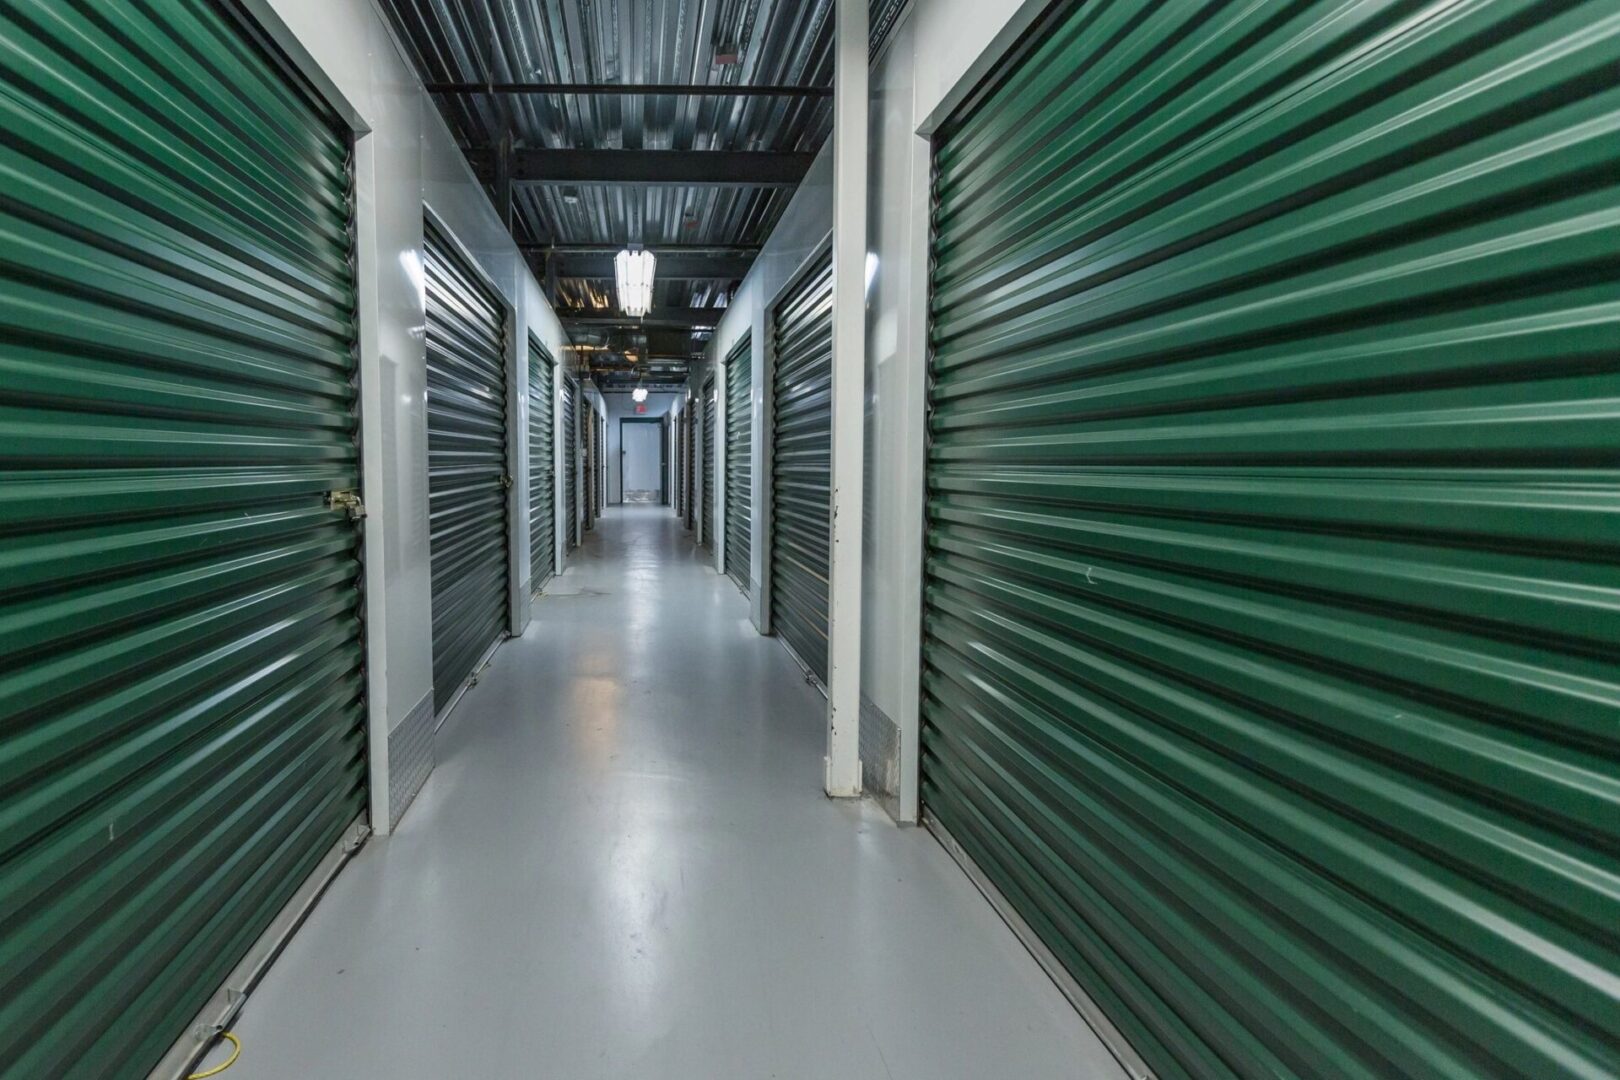 A hallway with many green doors and white walls.